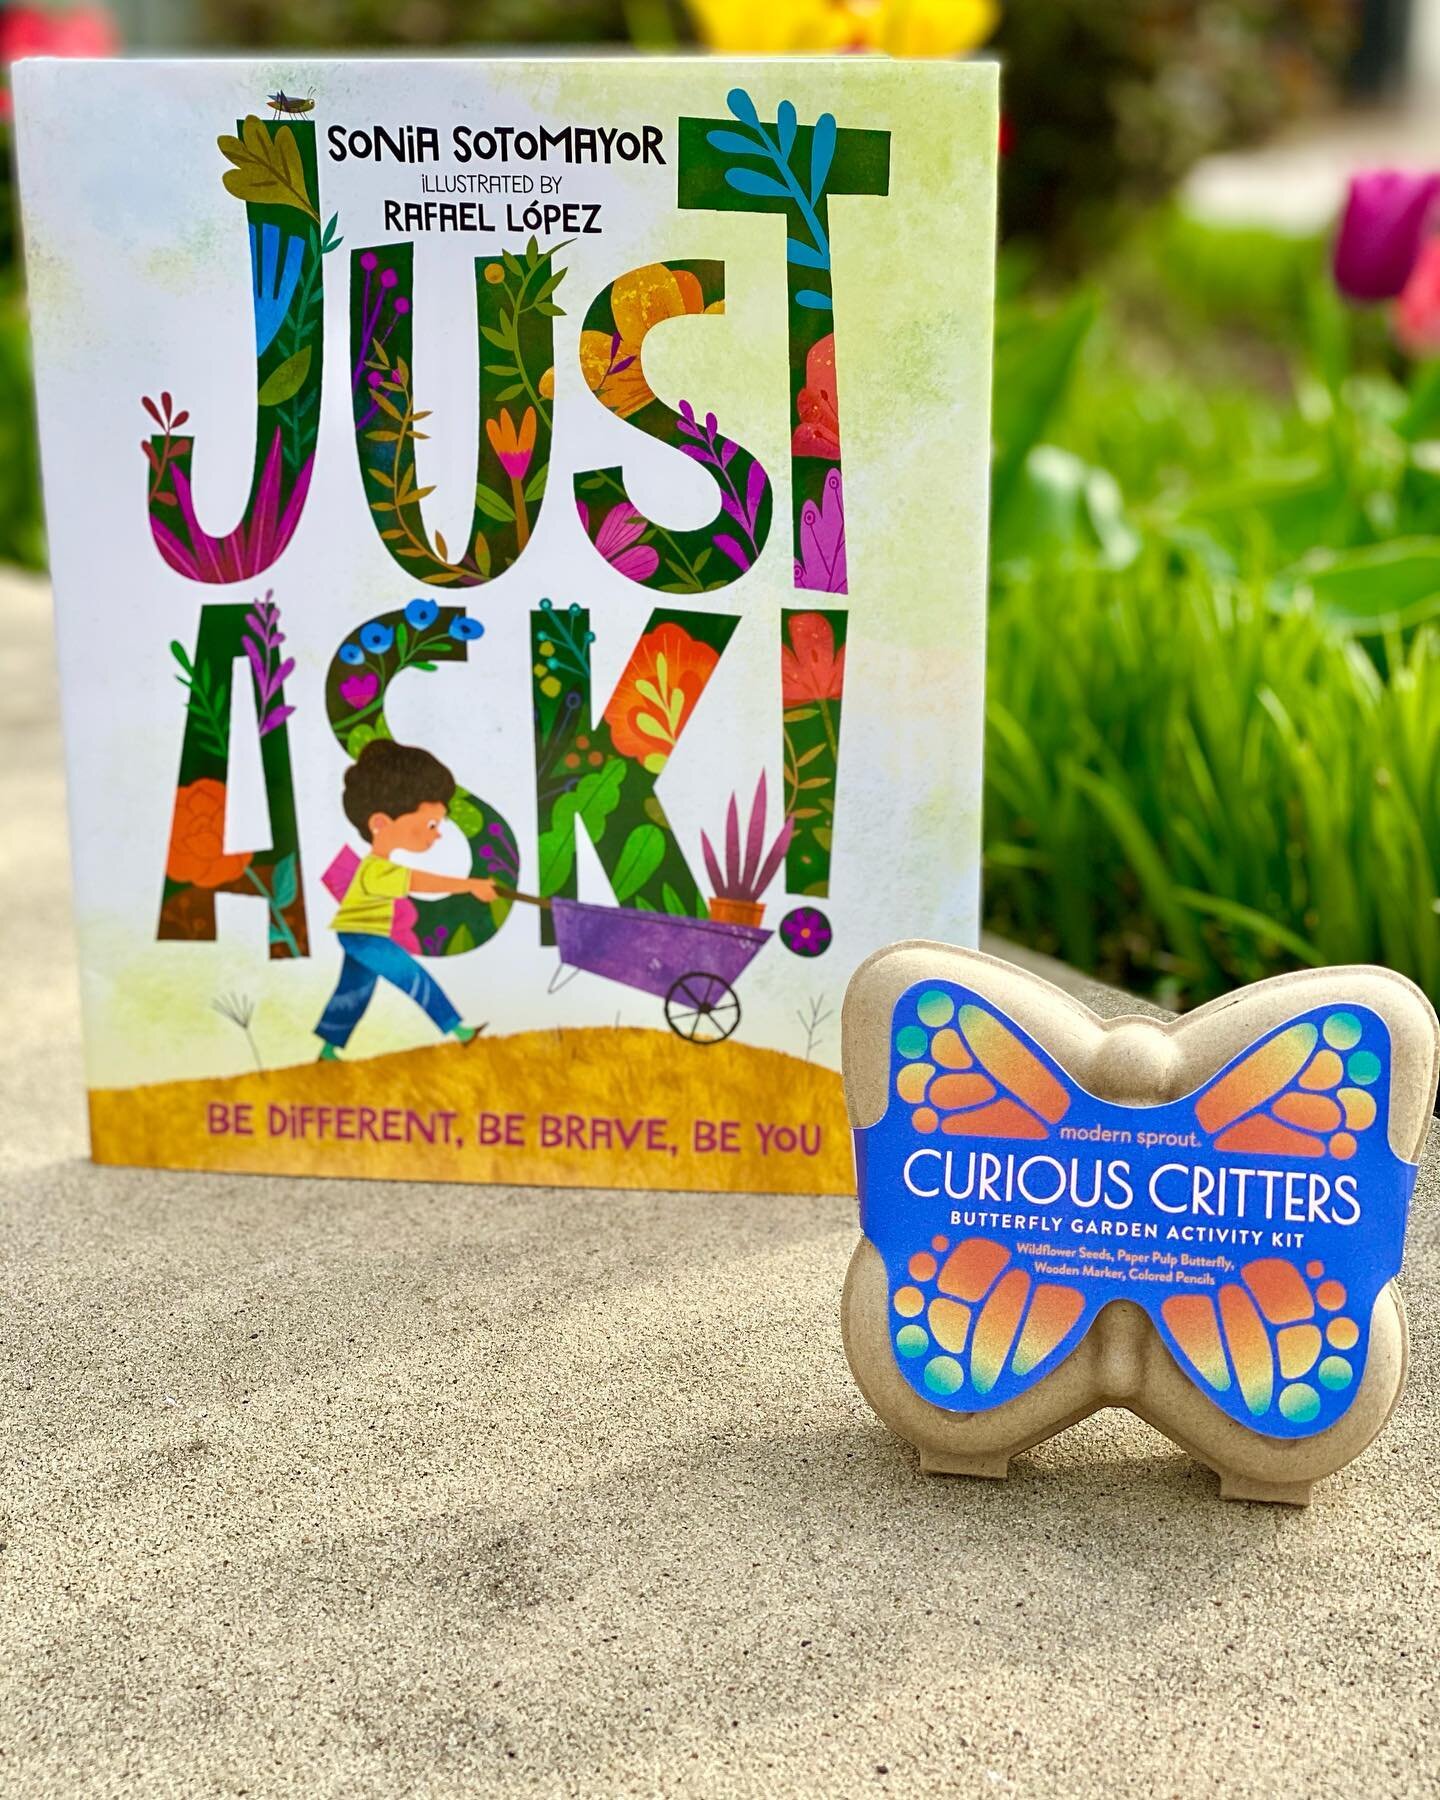 We hope you all are enjoying this beautiful spring day! As we gear up for garden season, we thought we might share one of our favorite kids books &amp; grow kits with you: &ldquo;Just Ask! Be Different, Be Brave, Be You&rdquo; ✏️ Justice Sonia Sotoma